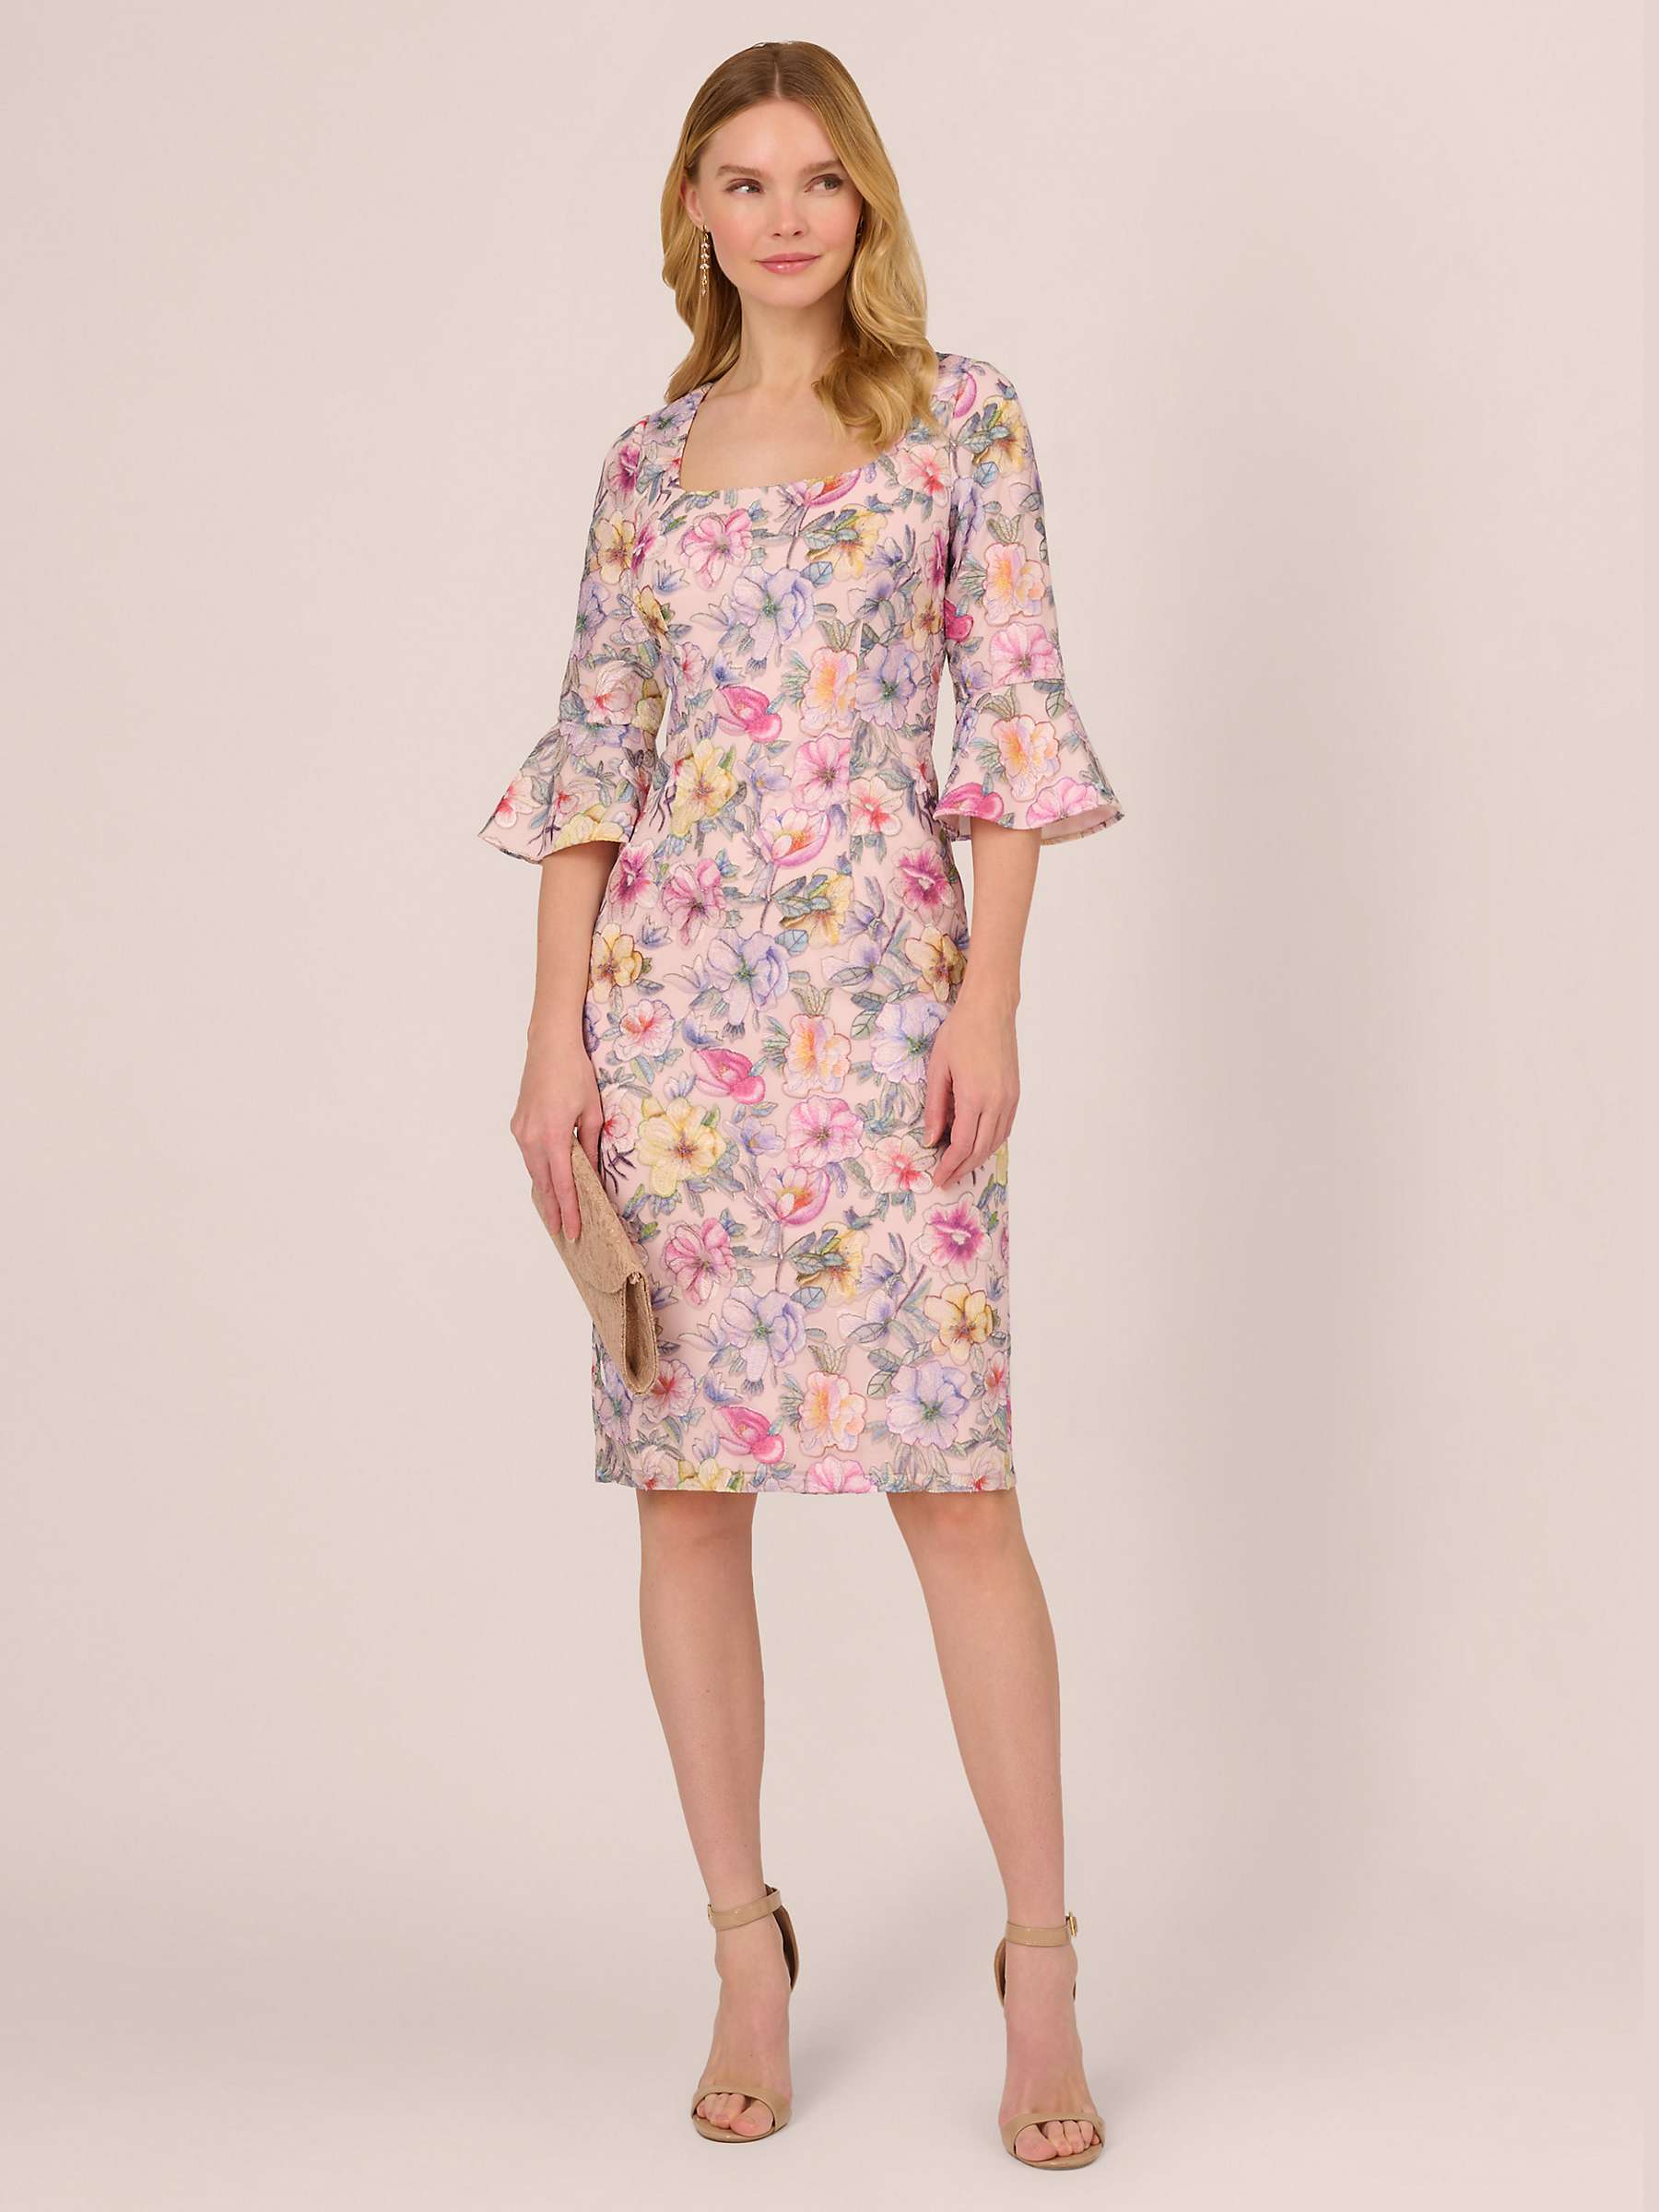 Buy Adrianna Papell Floral Knee Length Dress, Blush/Multi Online at johnlewis.com